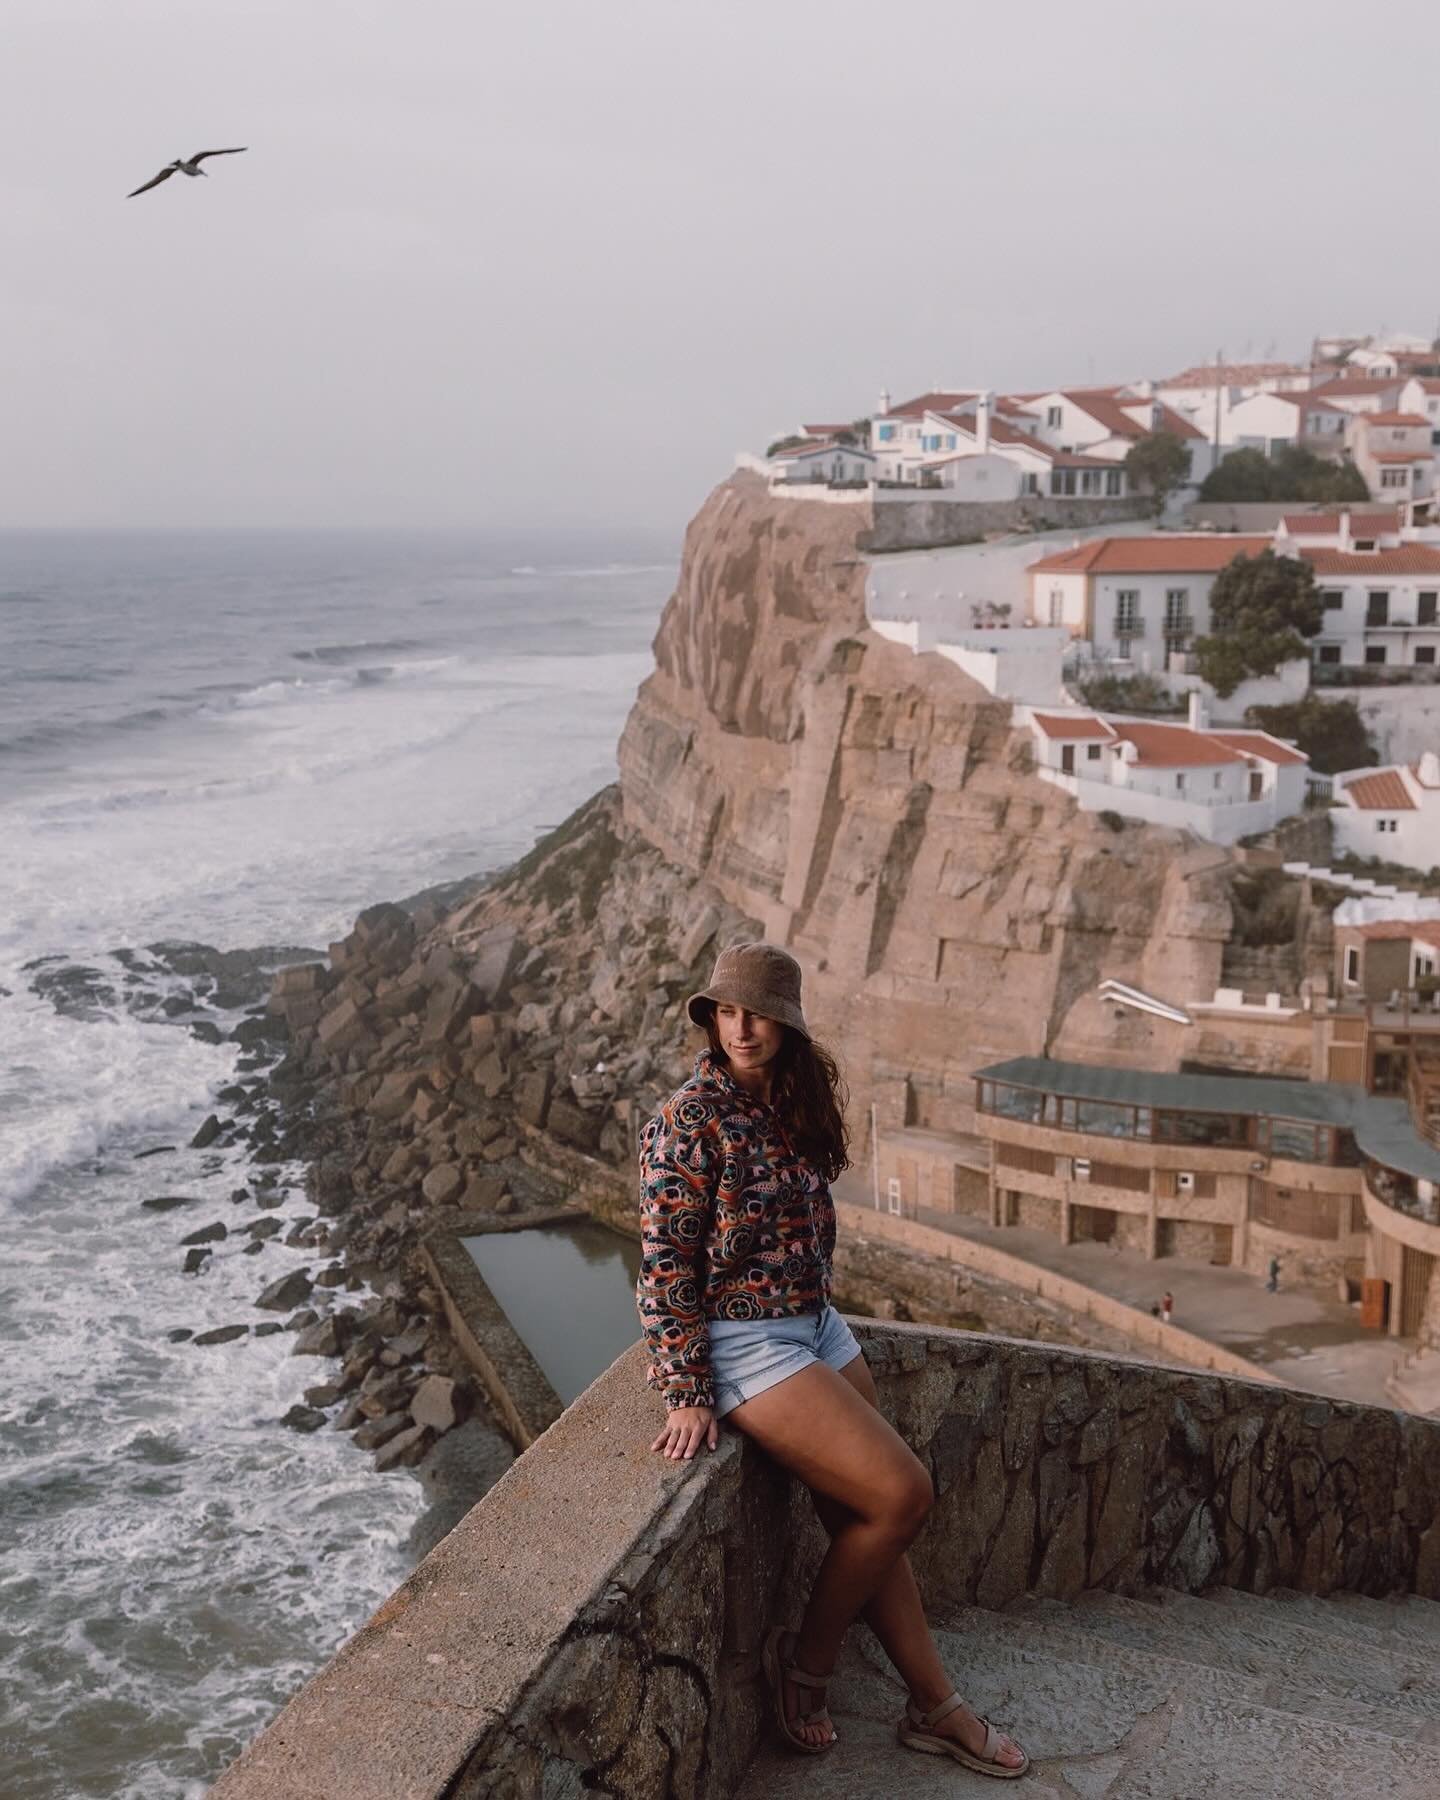 We love Portugal and we recently returned to wander the streets, eat good food and feel the ocean breeze!

Some of our favourite places include, Lisbon, Cascai, Sintra and the surrounding beaches 😍

We have many travel guides for Portugal and you ca